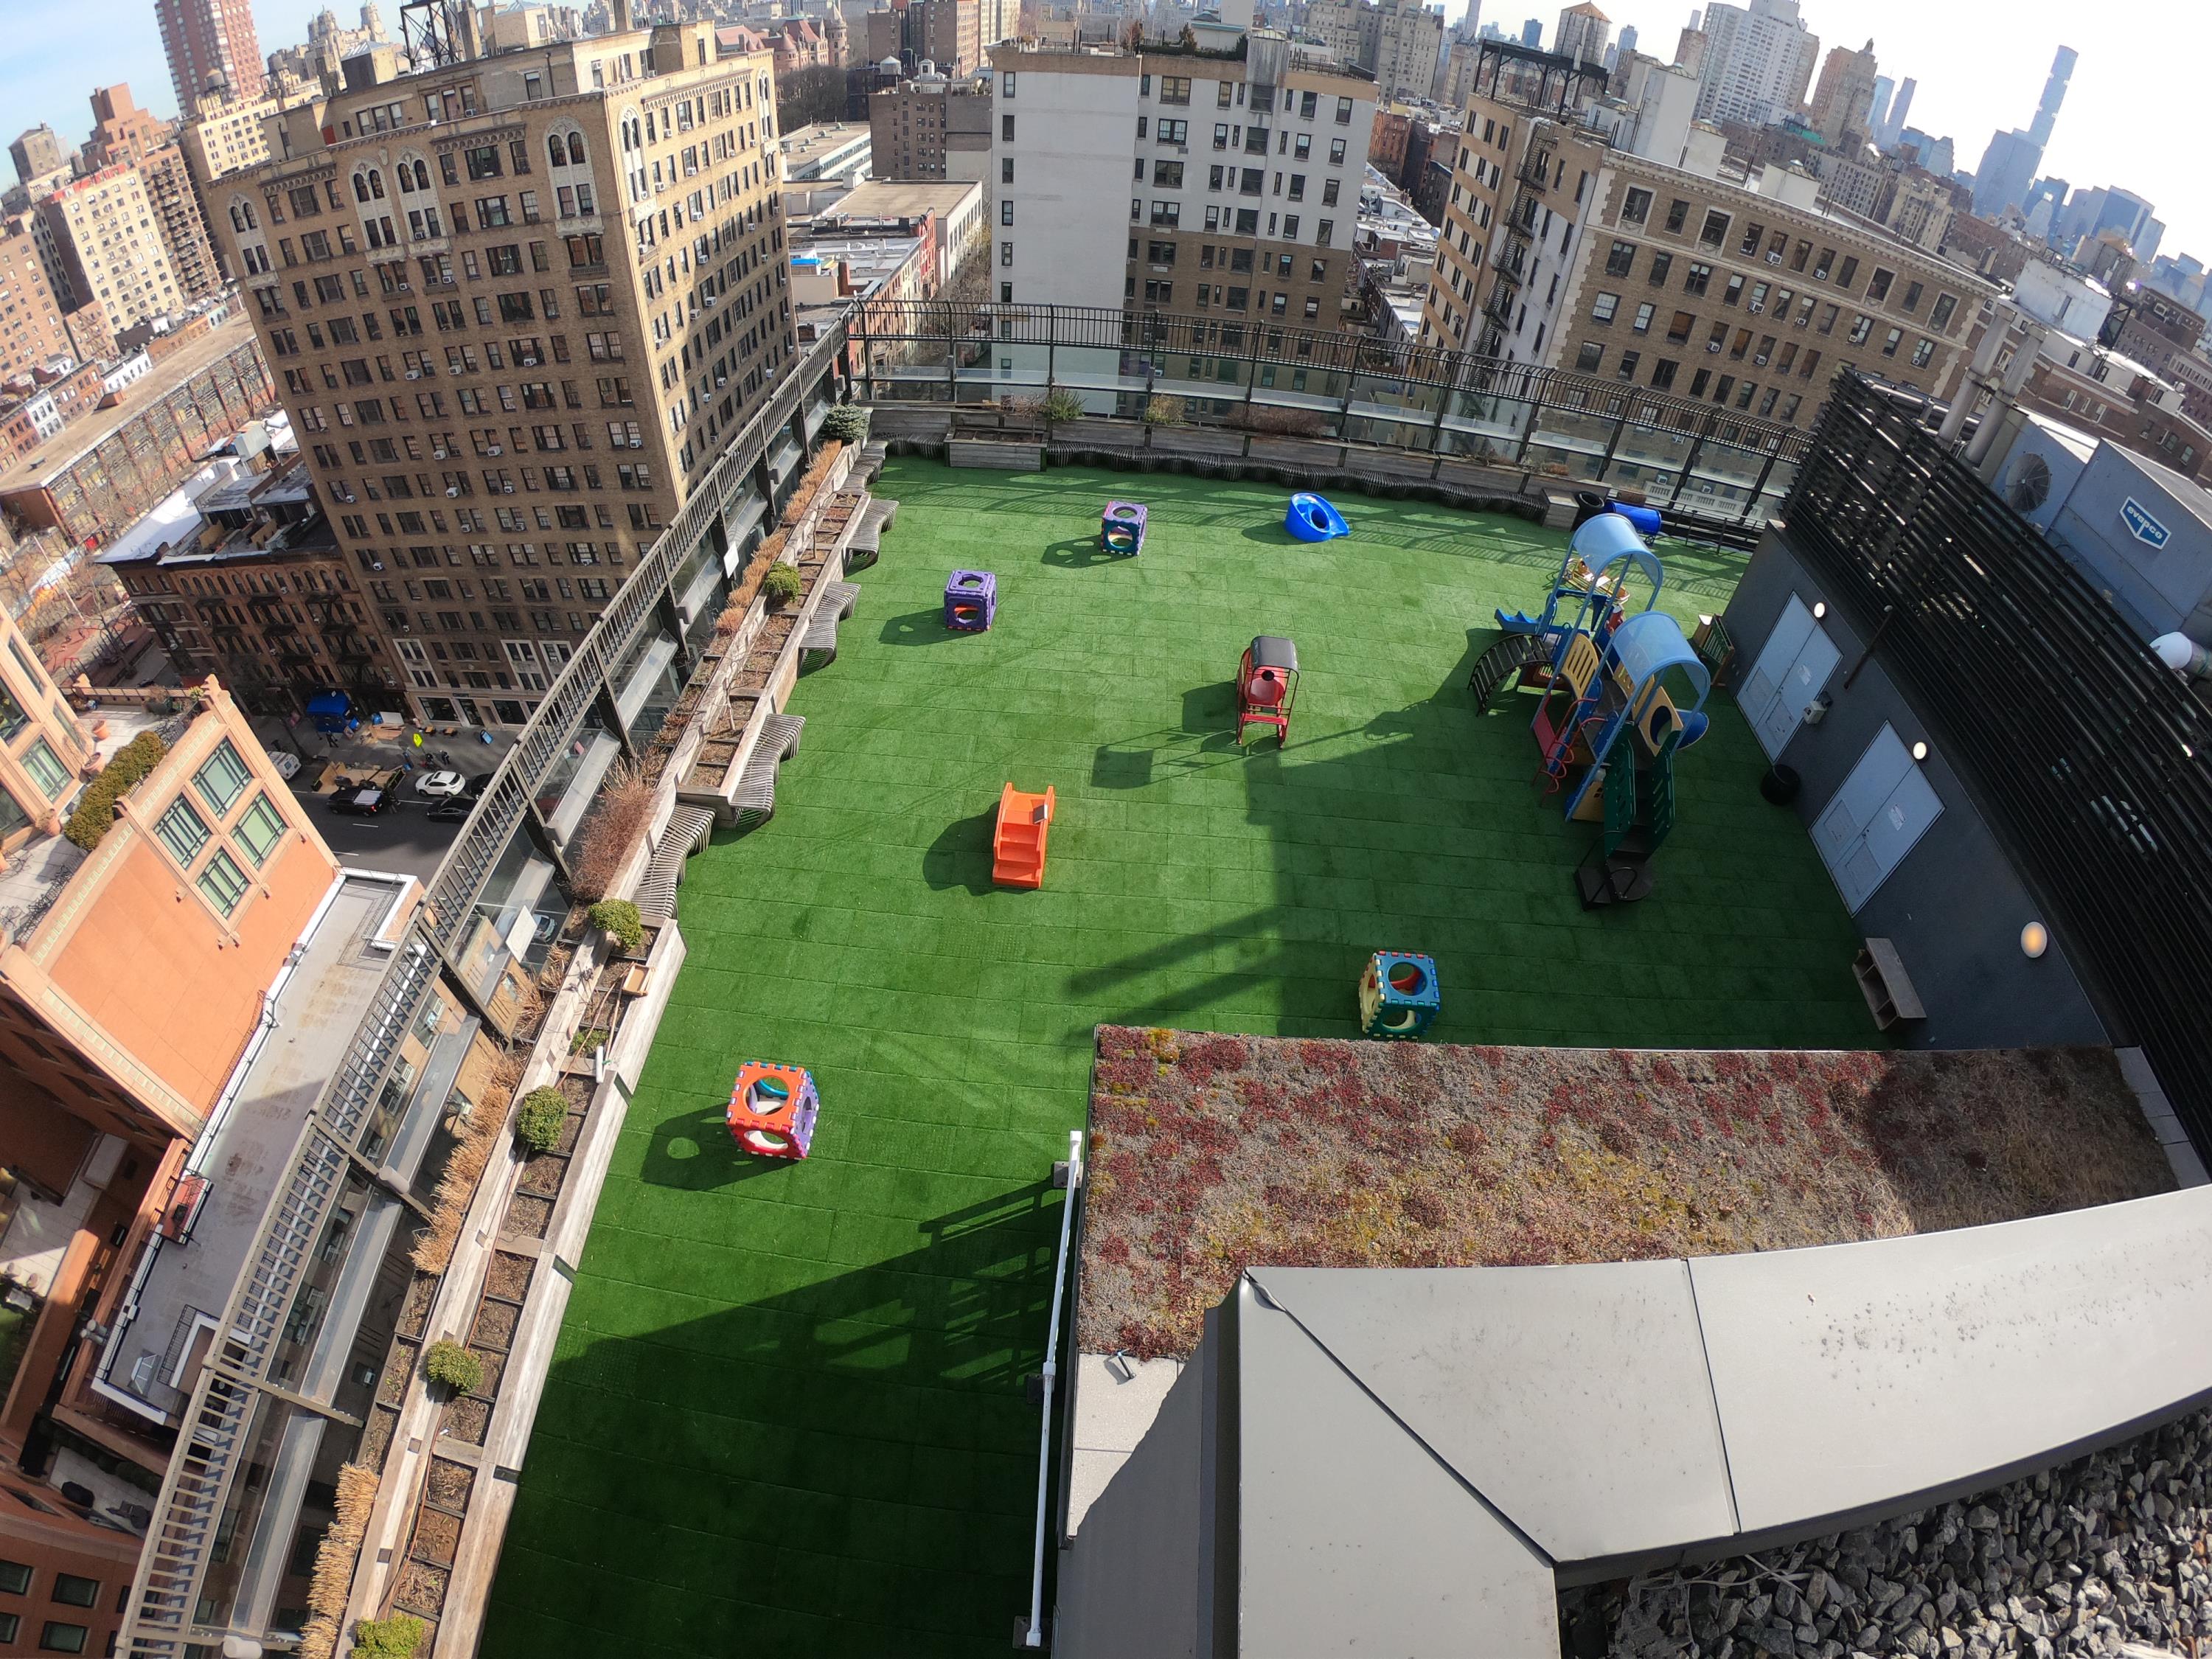 UNITY Surfacing at Rooftop Playground using Turf-Tiles